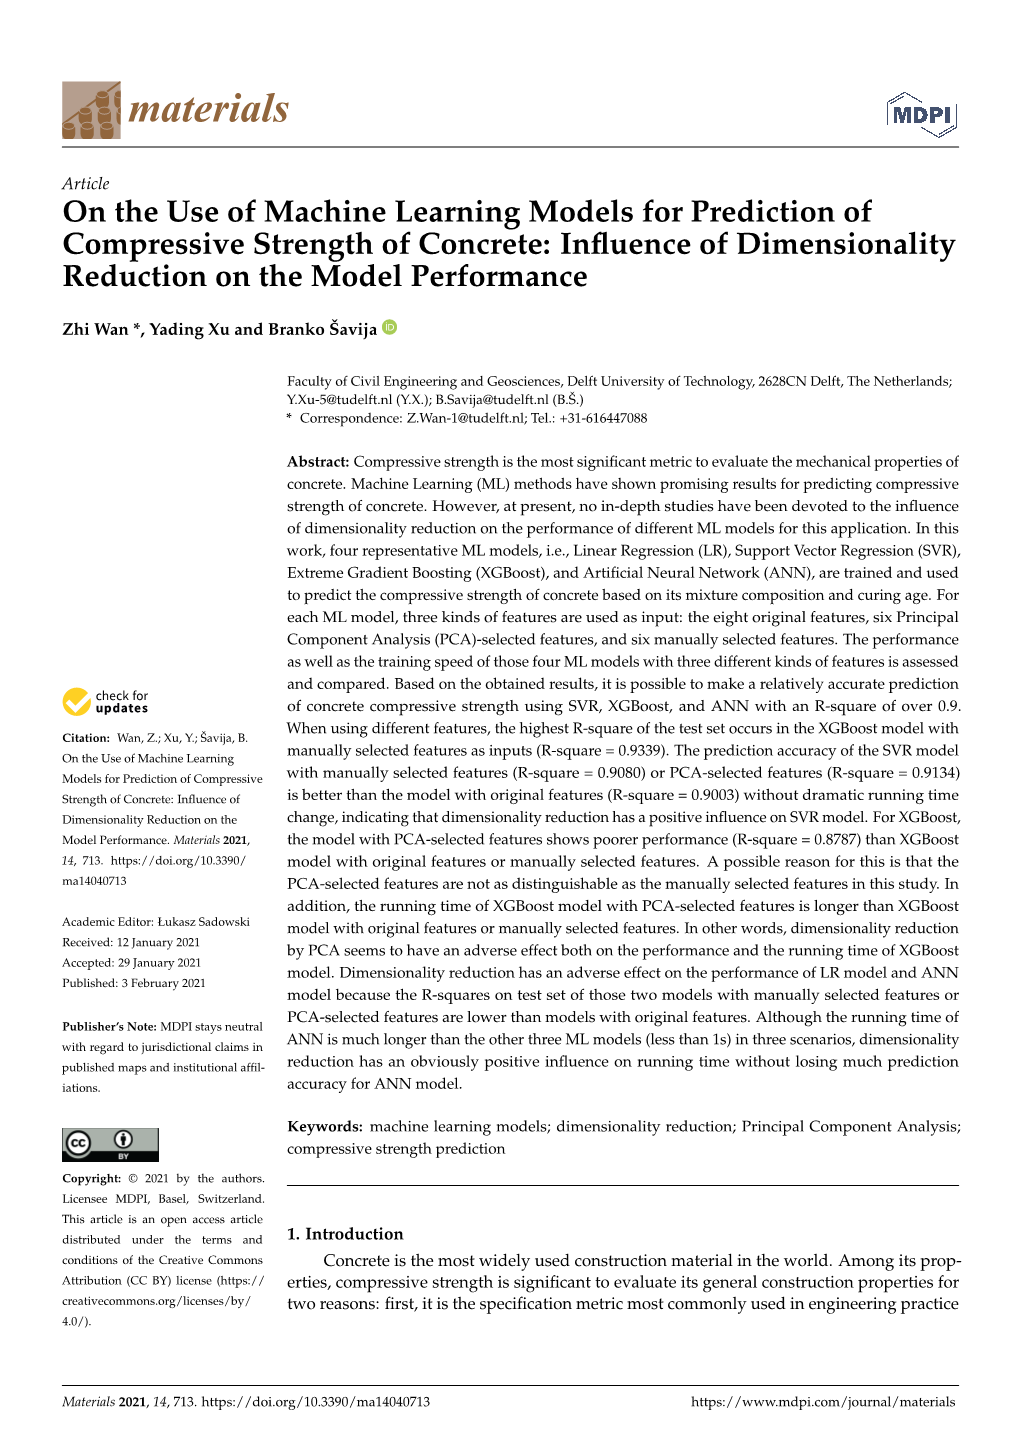 On the Use of Machine Learning Models for Prediction of Compressive Strength of Concrete: Influence of Dimensionality Reduction